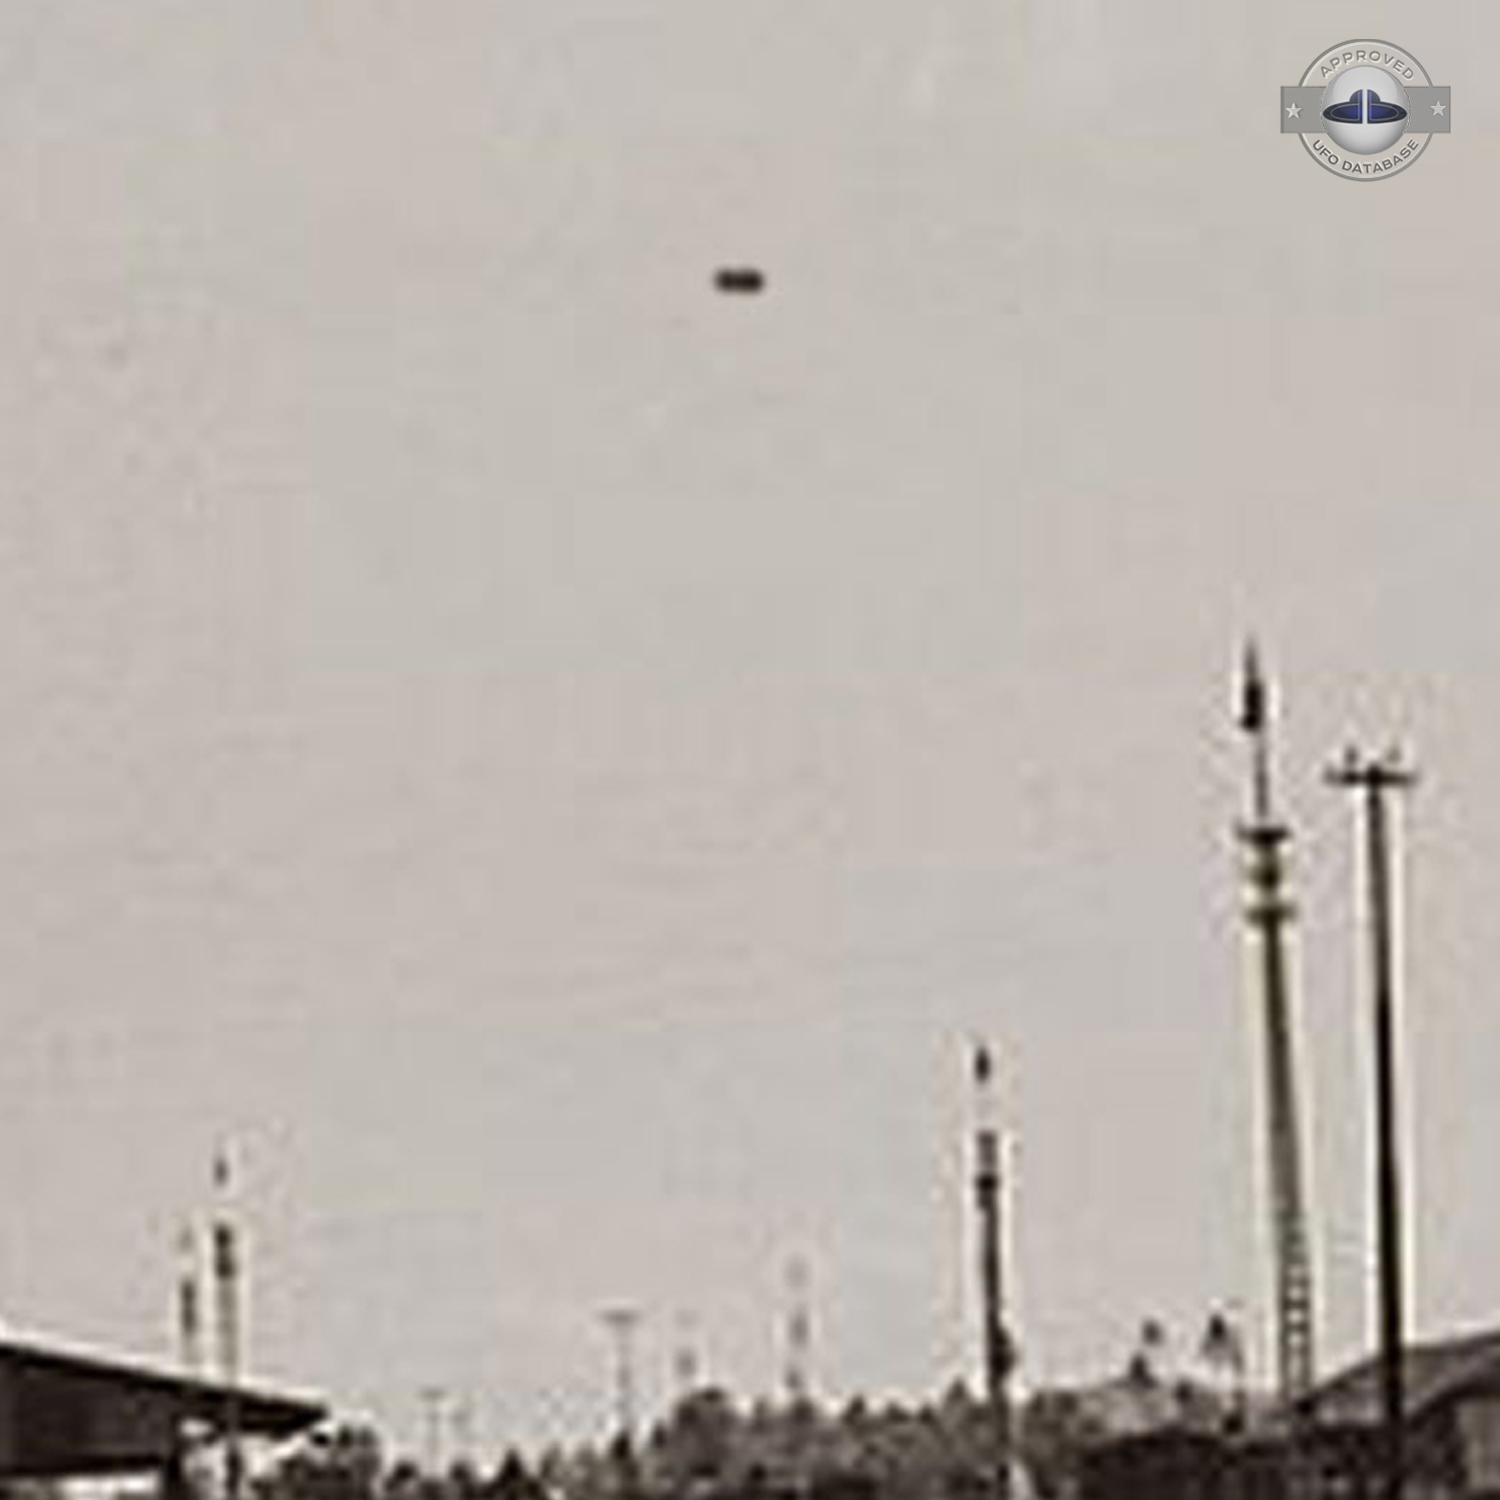 1935 | During the construction of the Dutch colonial state railway UFO Picture #121-3